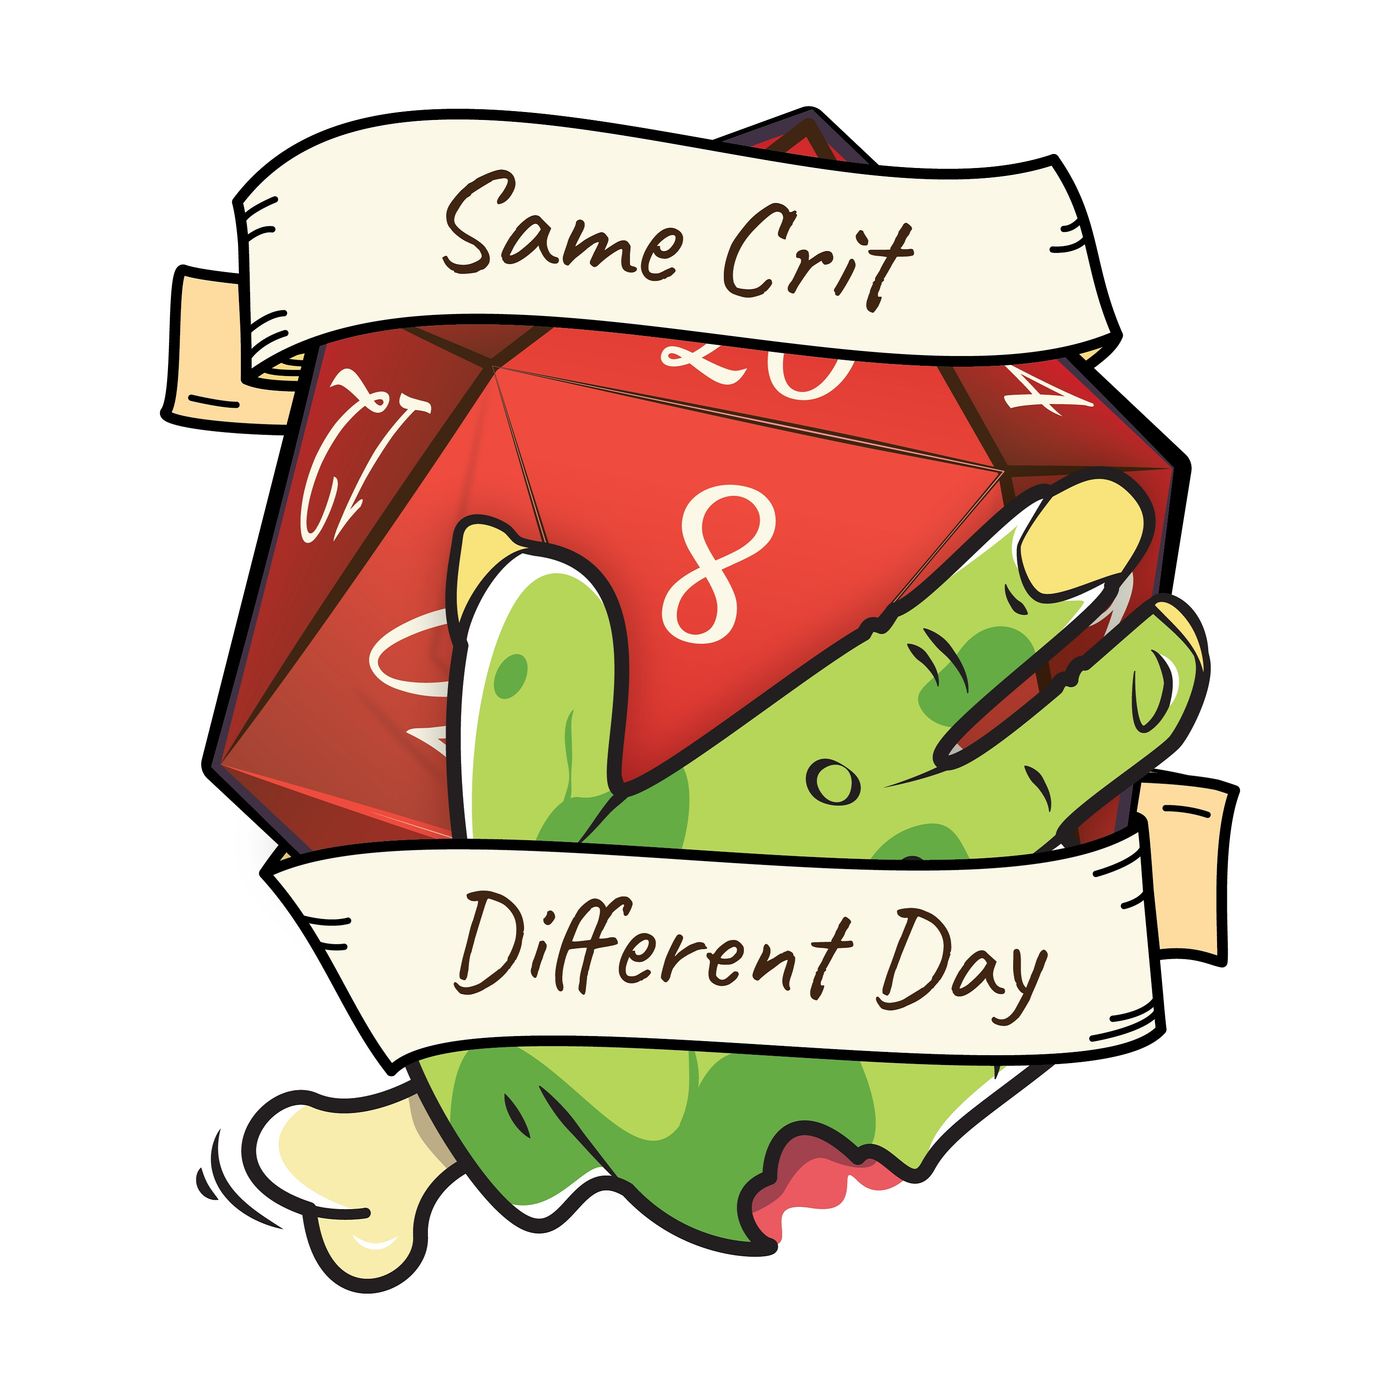 Same Crit Different Day